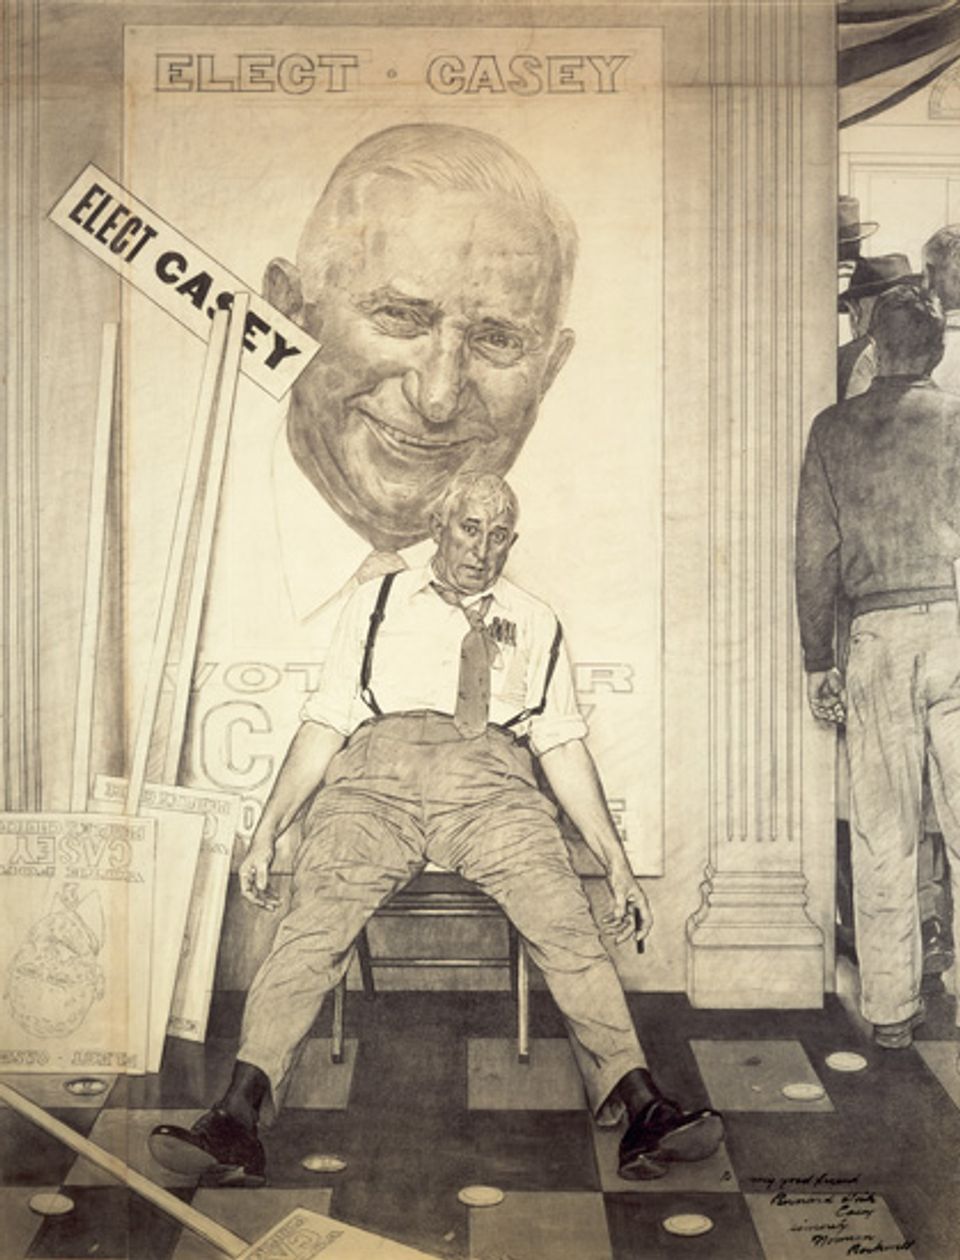 Rockwell's charcoal and pencil on paper of a man sitting in front of a sign of himself saying "Elect Casey"